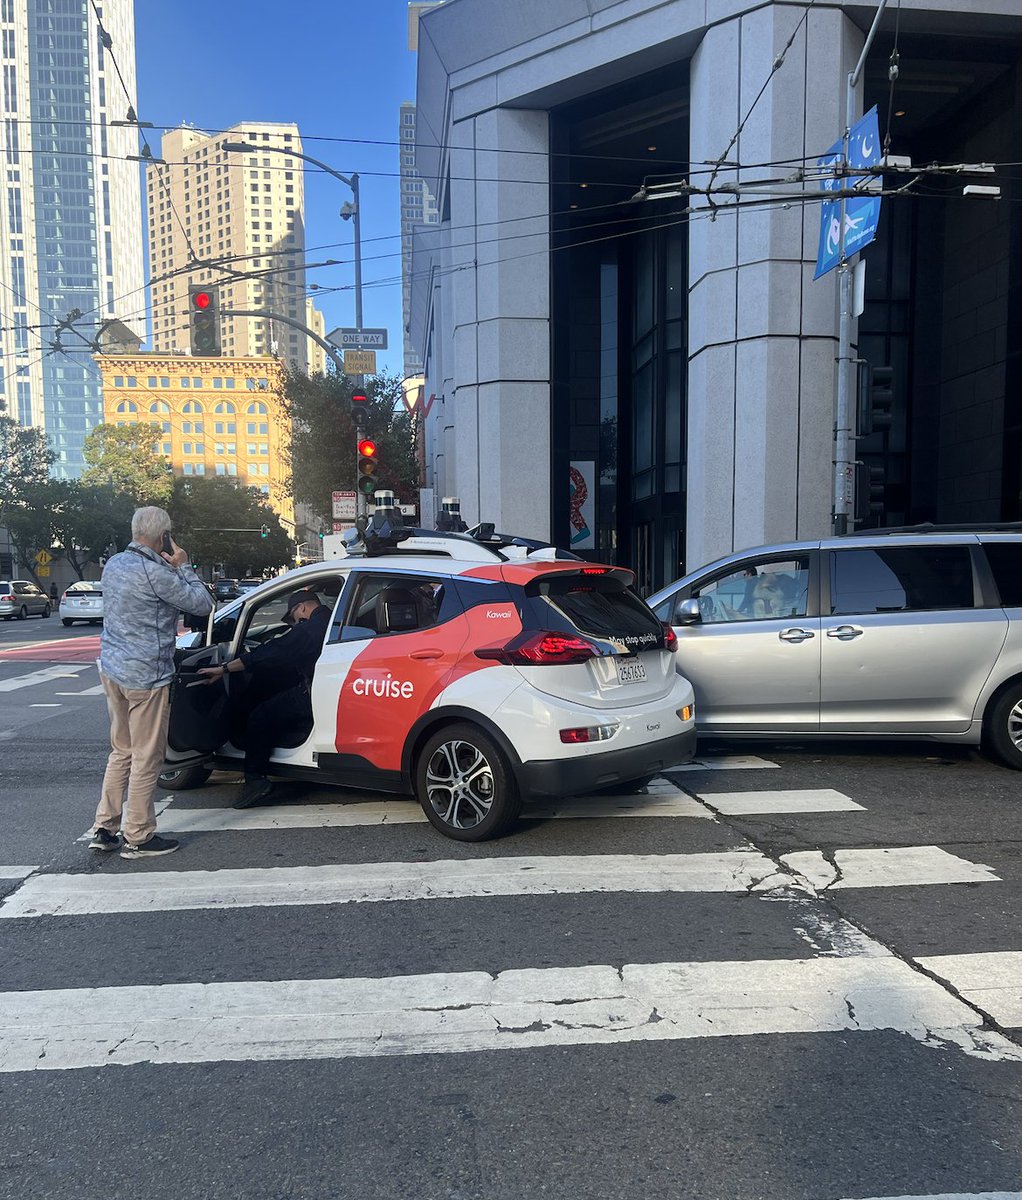 Just saw a Cruise driverless car stuck in the middle of Financial District in SF. It's blocking traffic and causing a major headache for everyone. I'm starting to wonder if these cars are really ready for prime time. [@Cruise] #driverlesscars #SF #traffic